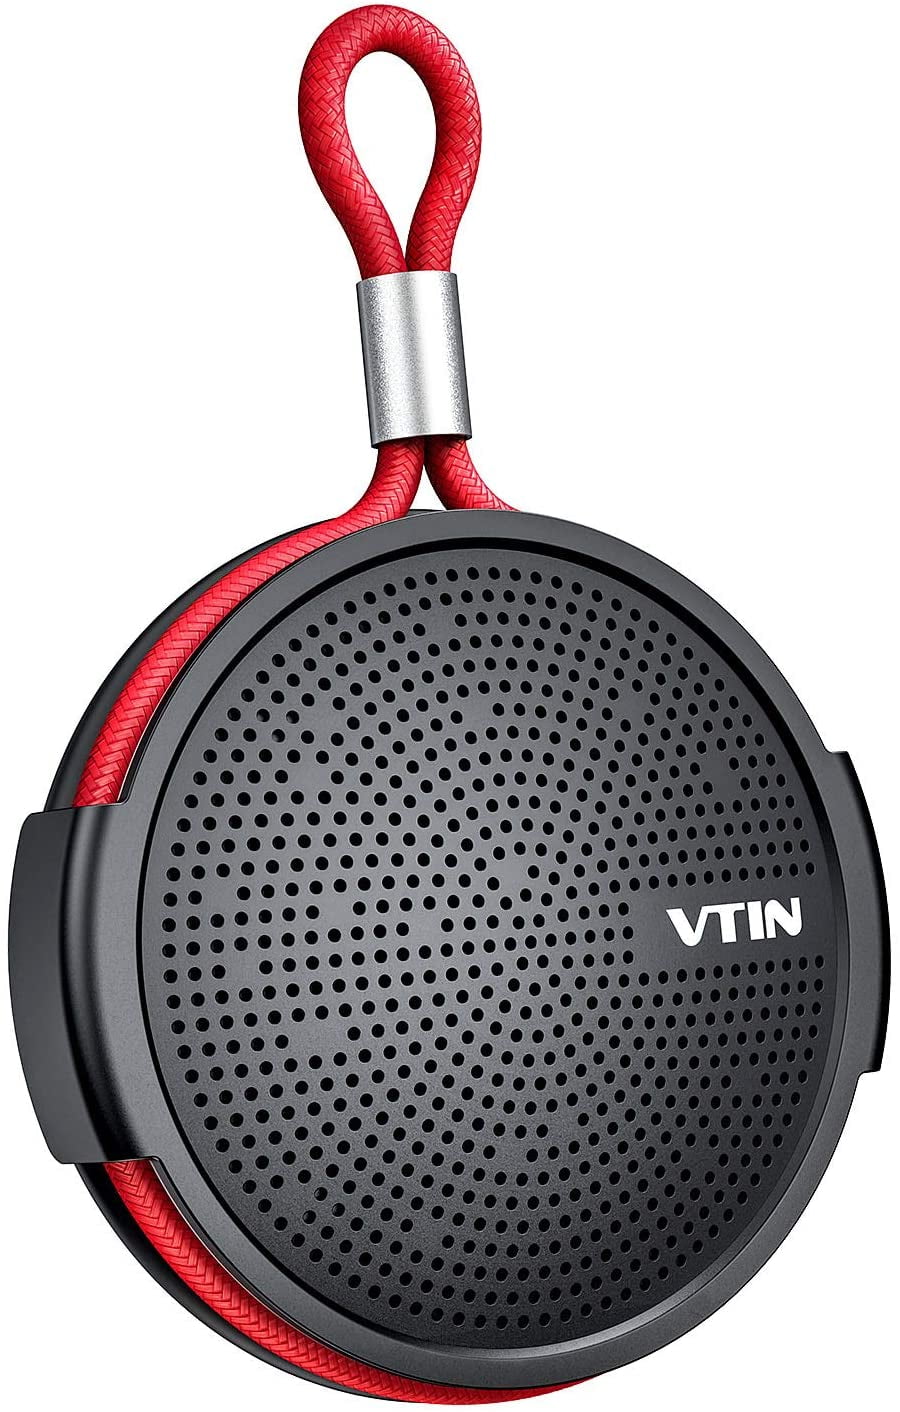 Built-in Microphone VTIN Portable Outdoor Speakers Bluetooth Black Bluetooth Speaker Waterproof with HiFi Sound Big Bluetooth Speakers with 30 Hours 